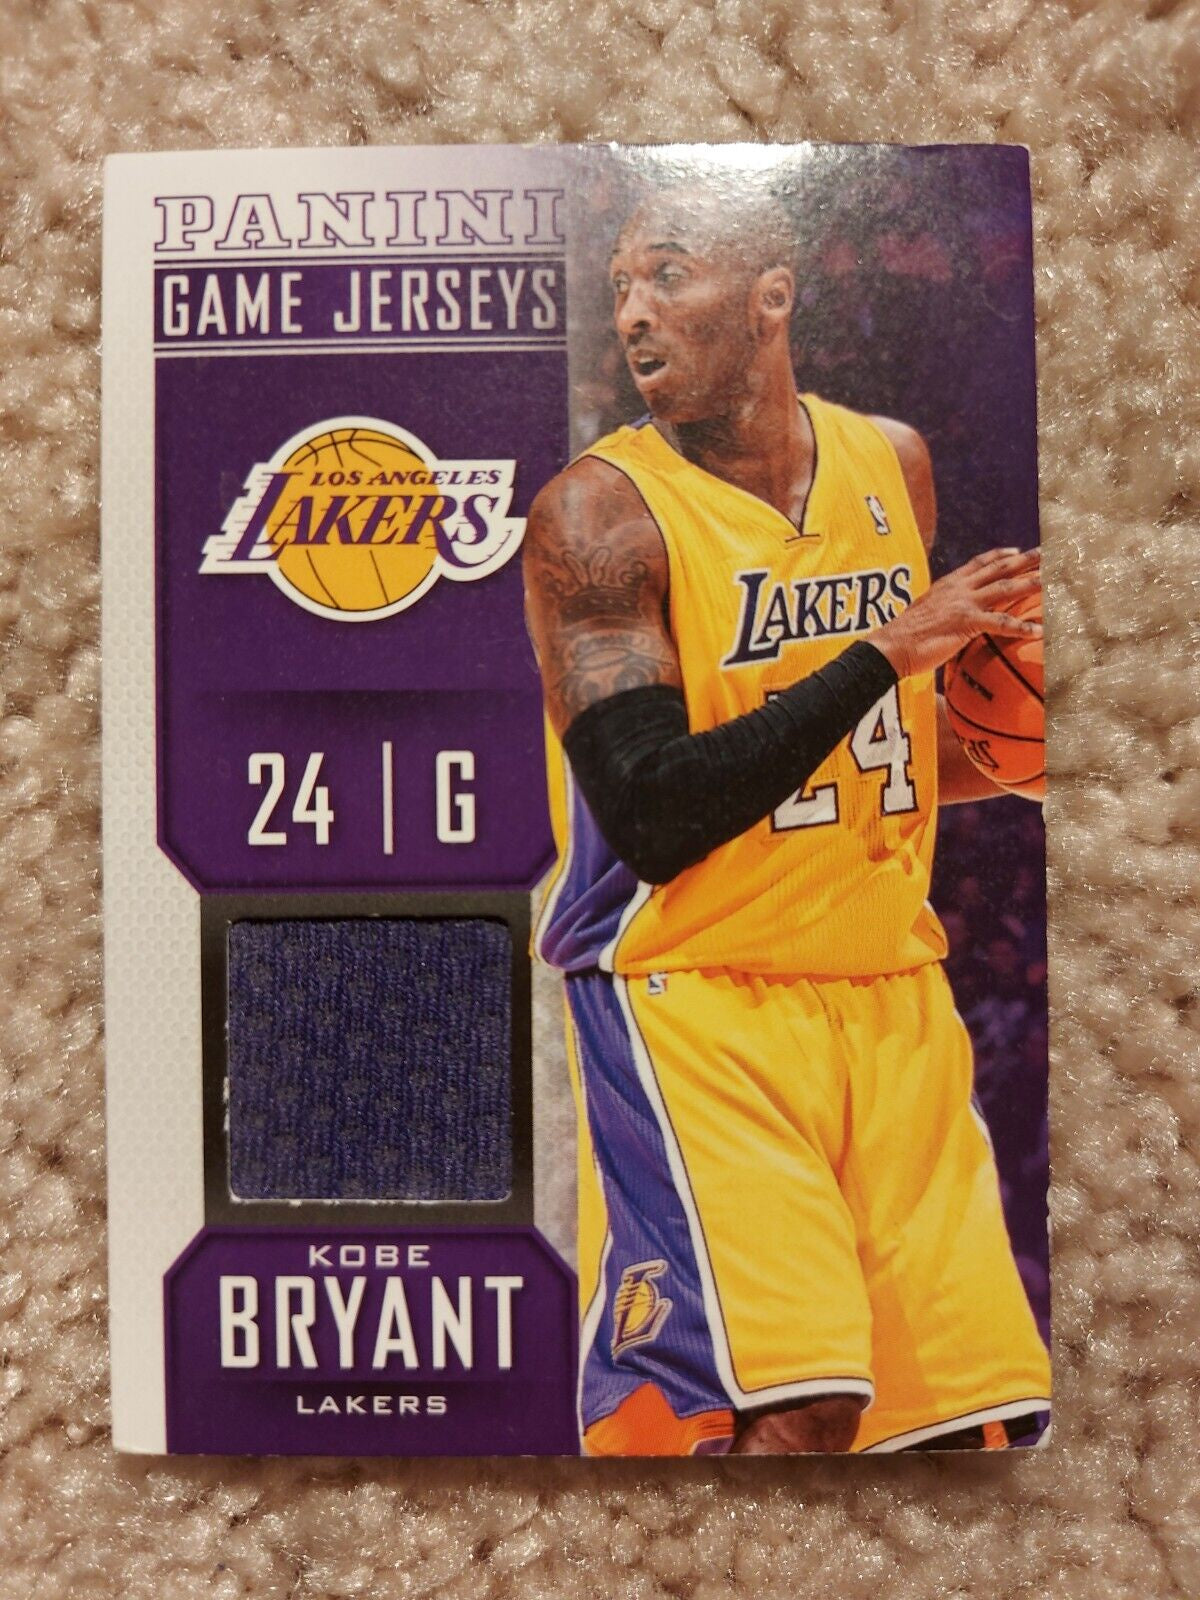 Kobe Bryant - In Los Angeles Lakers Jersey - Game-Used Worn Swatch Relic Jersey Memorabilia Card - Sports Card Single (Randomly Selected, May Not Be Pictured)